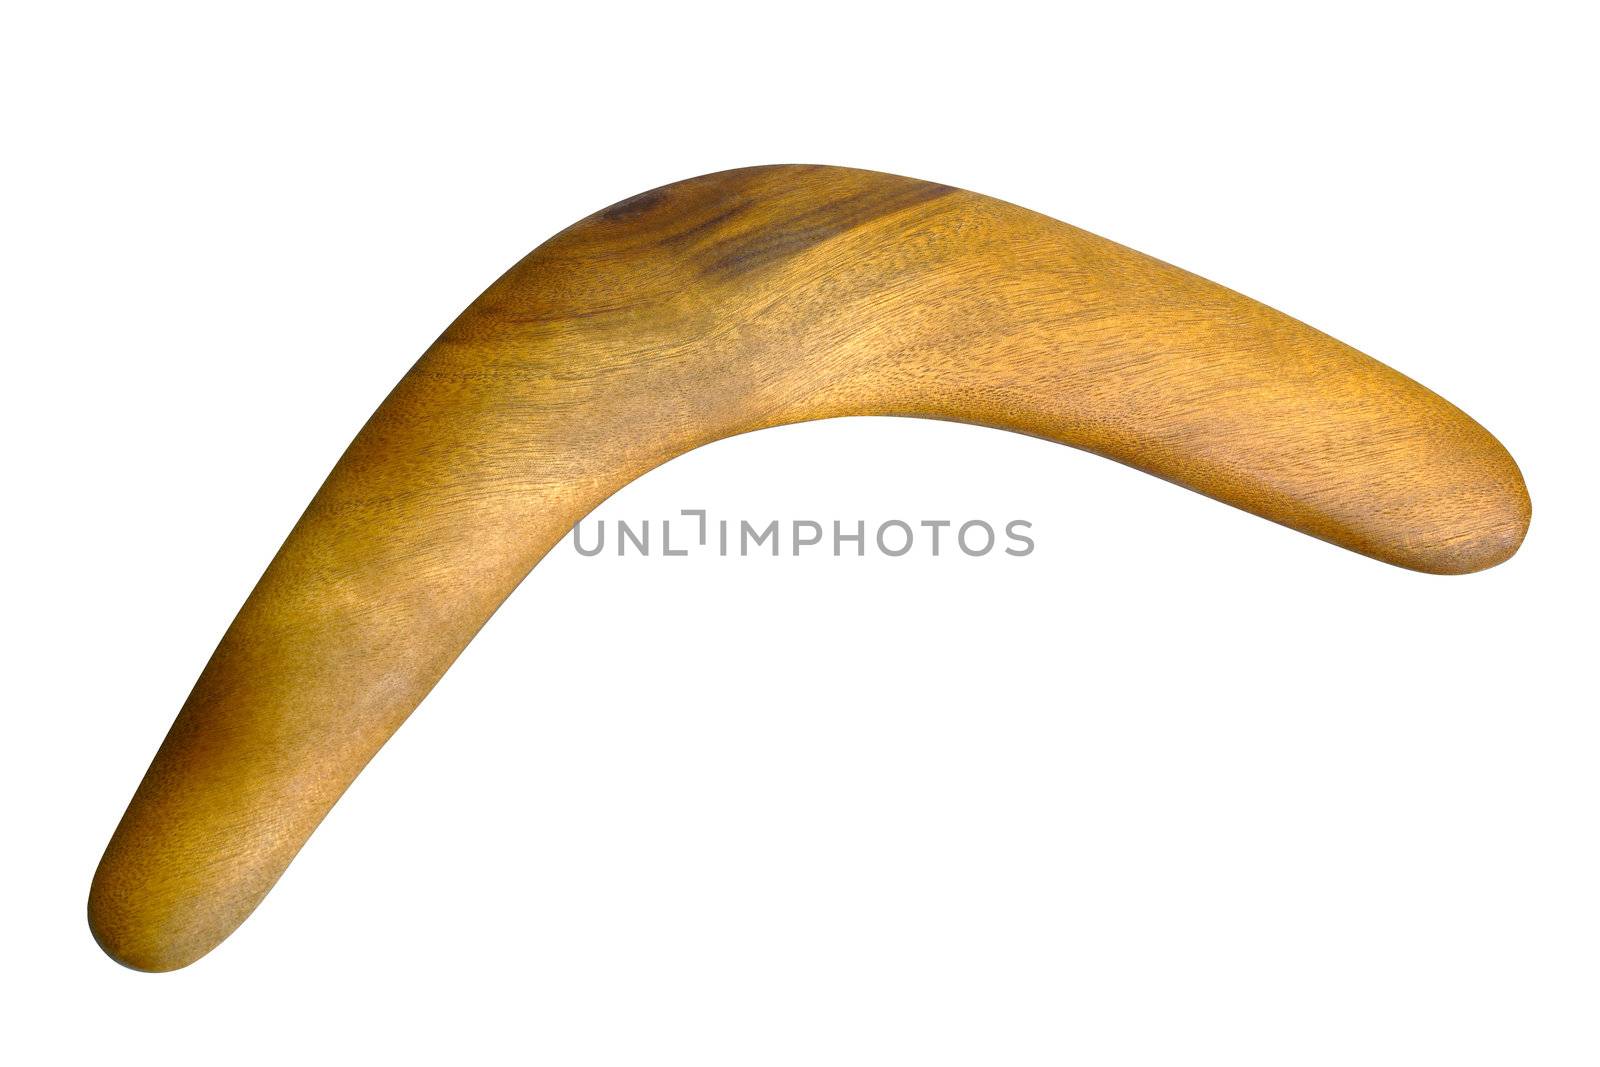 Image of an isolated boomerang bought in Australia.
